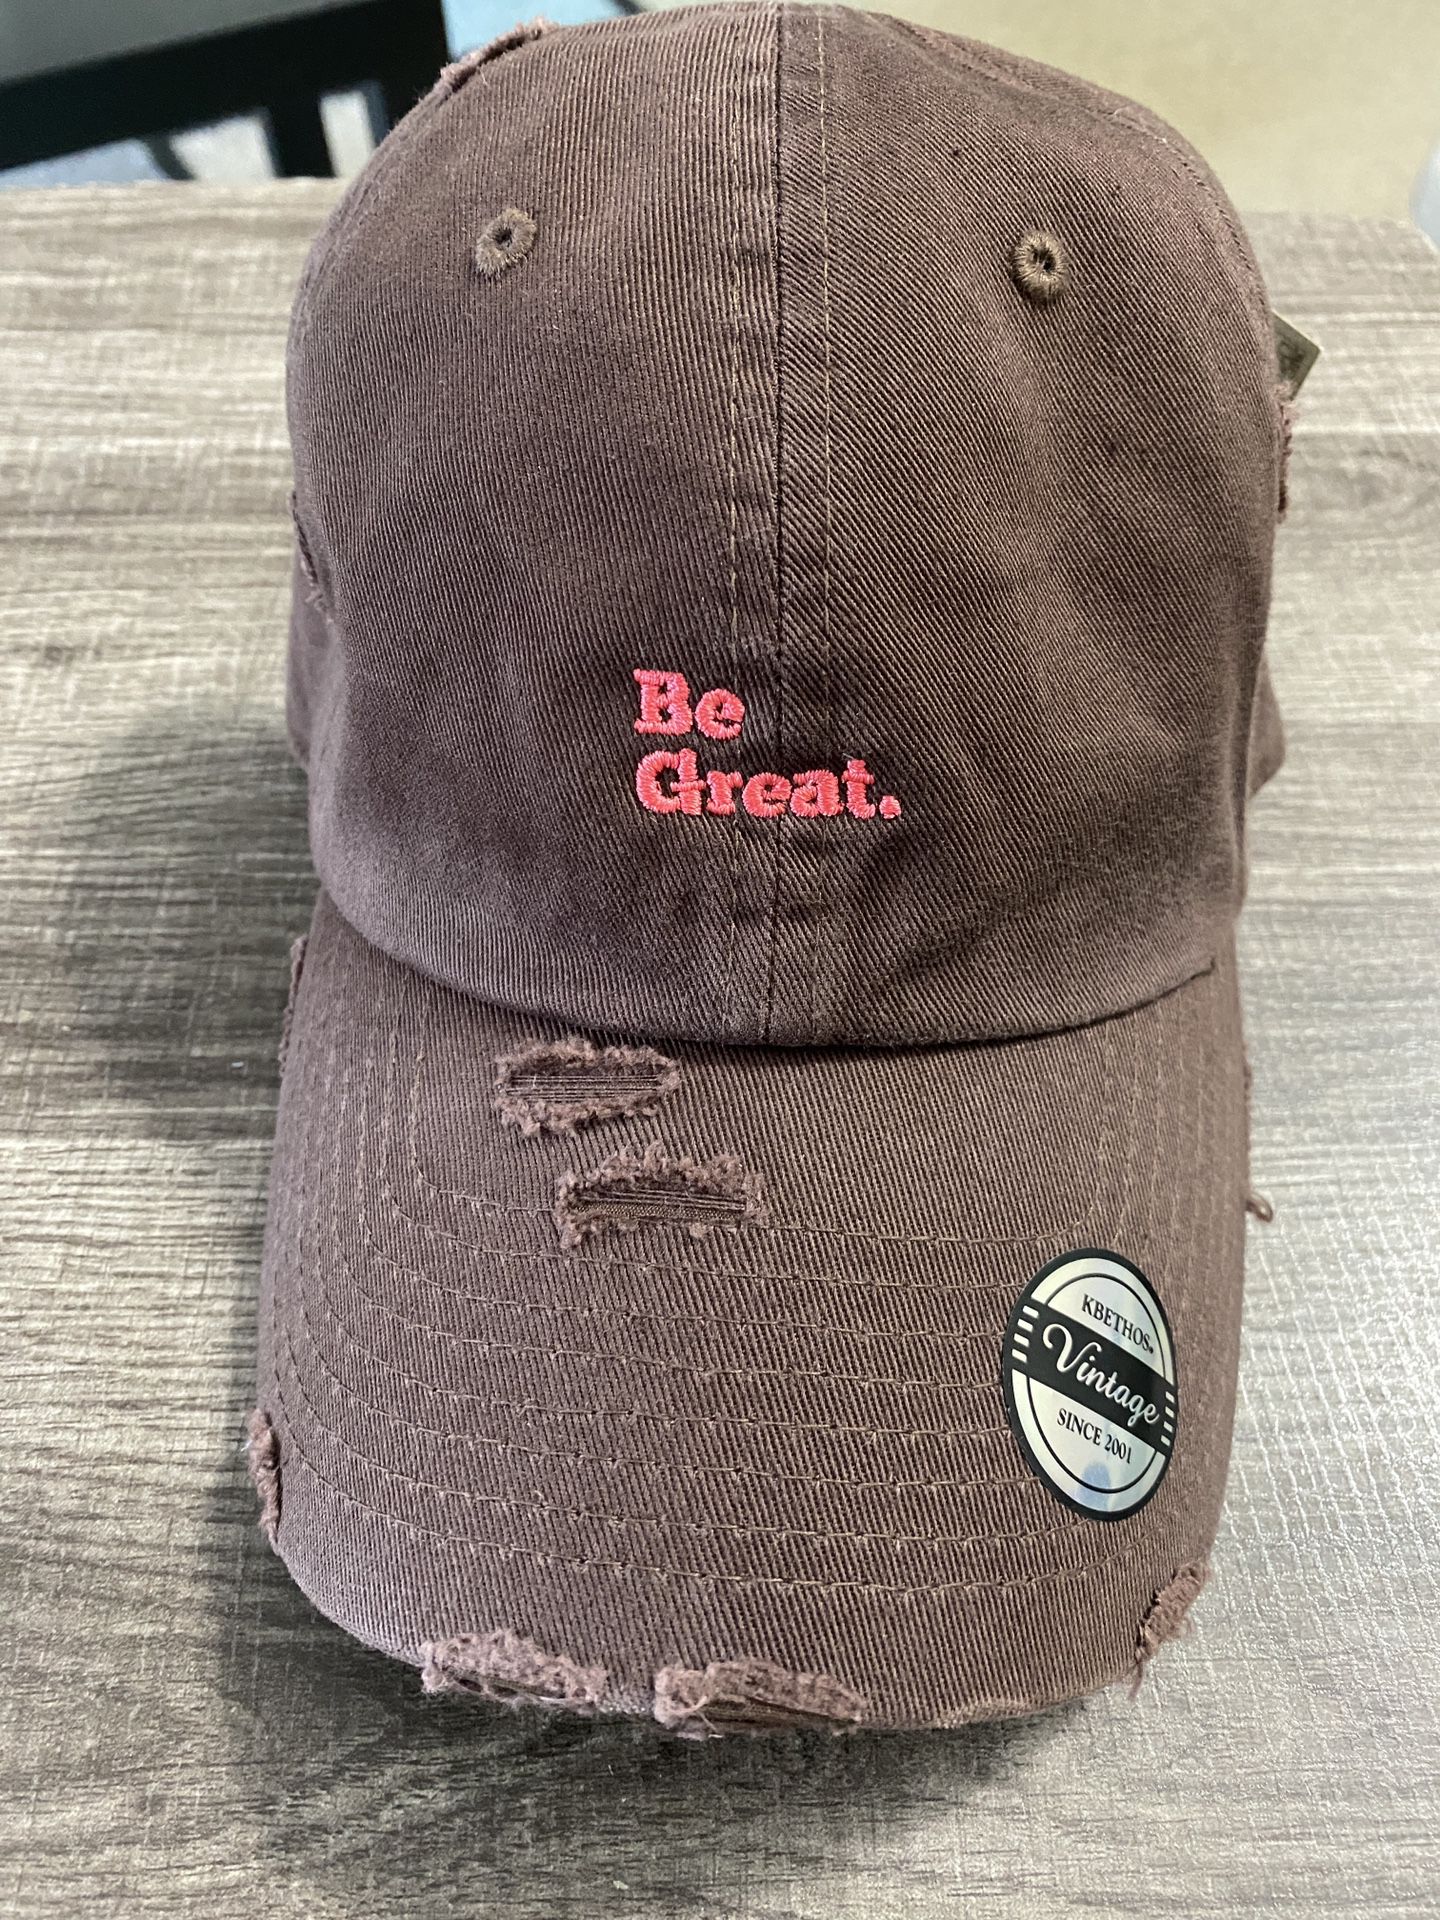 Brown Distressed Hat, Adjustable Fit (BRAND NEW)